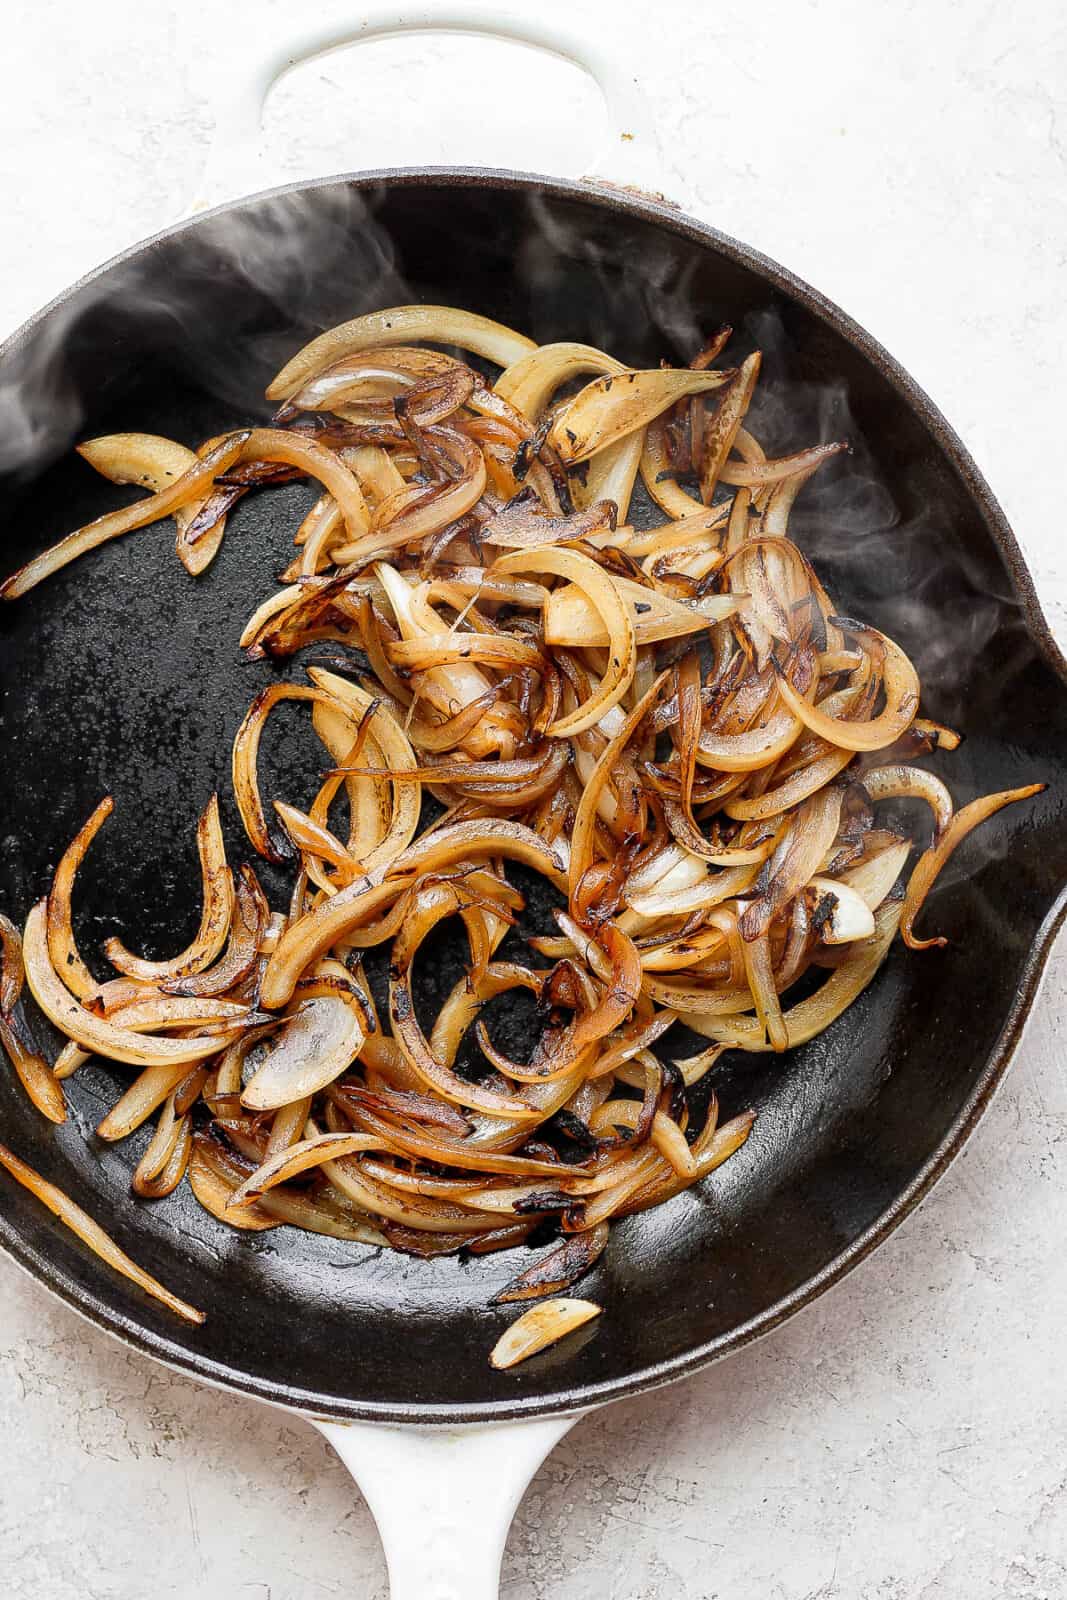 Caramelized whiskey onions in a cast iron skillet.